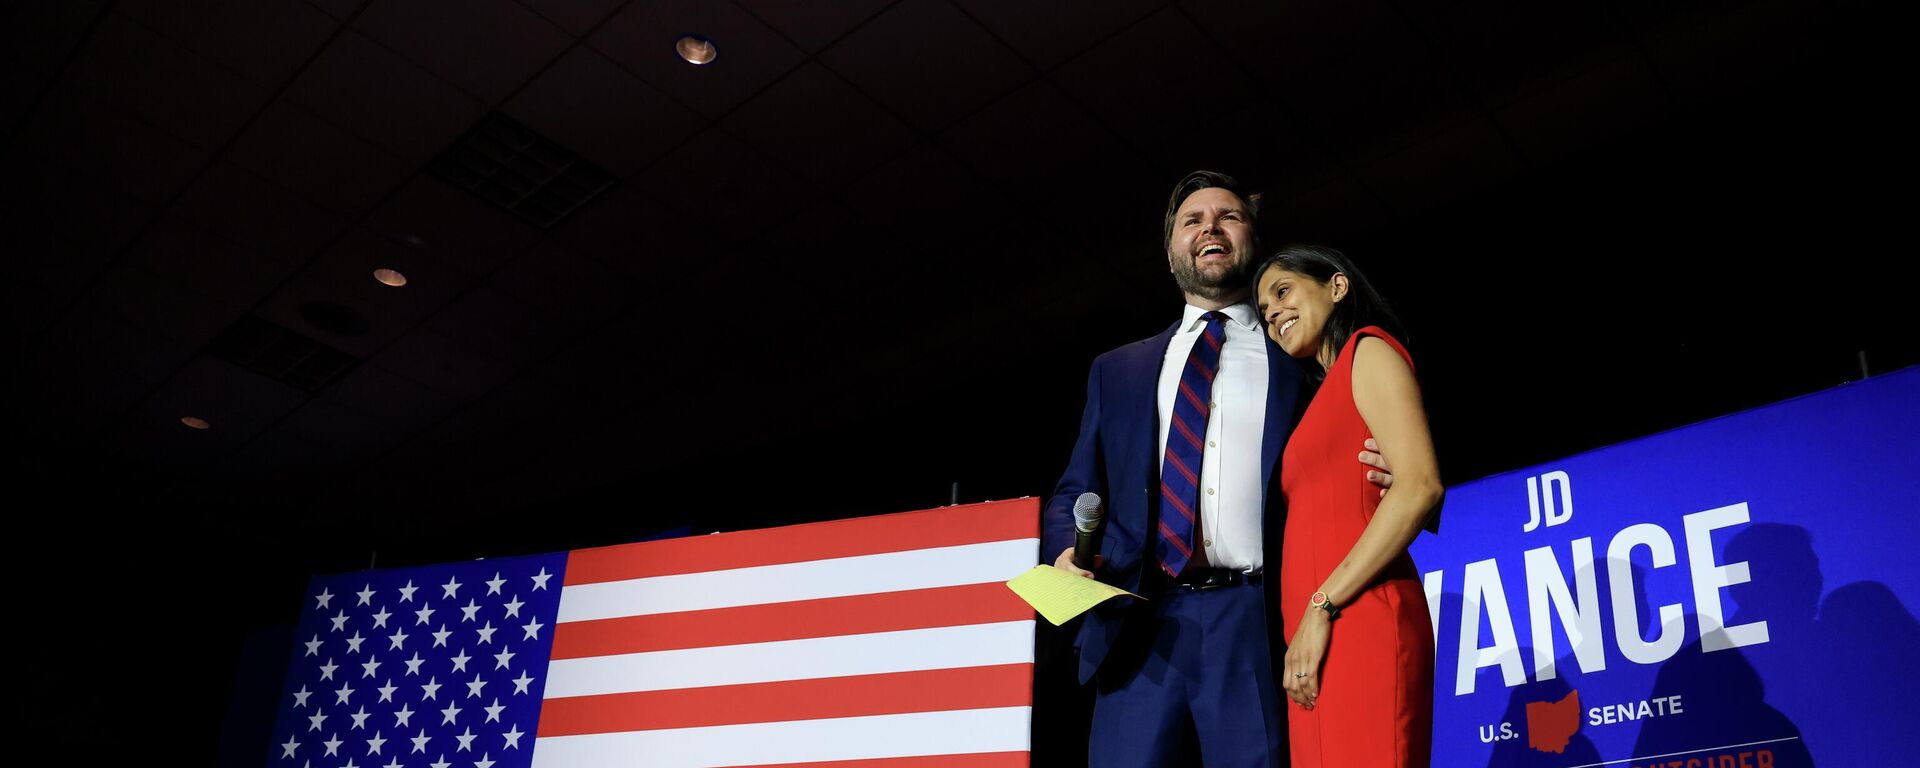 Republican Senate candidate JD Vance, left, is hugs his wife Usha Vance, as he prepares to speak to supporters during an election night watch party, Tuesday, May 3, 2022, in Cincinnati. - Sputnik International, 1920, 24.01.2024